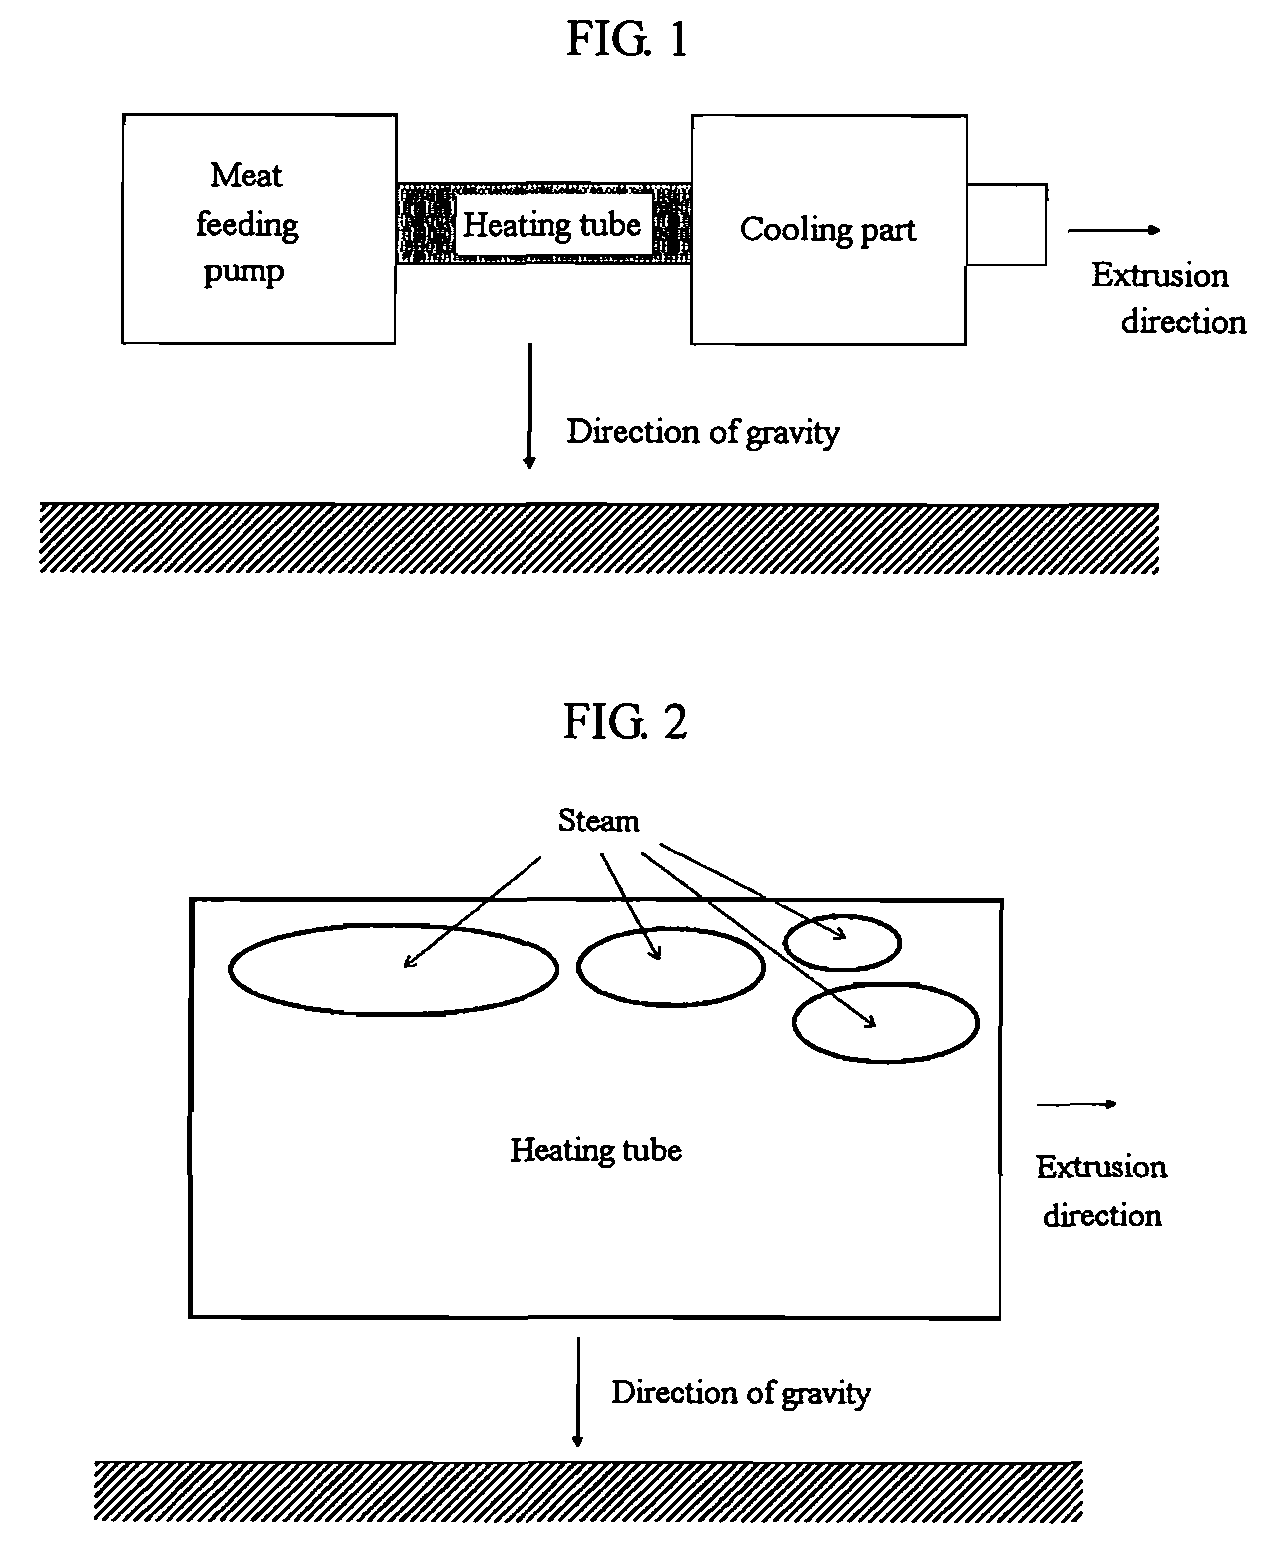 Process for production of protein-containing food employing continuous heating method by internal heating